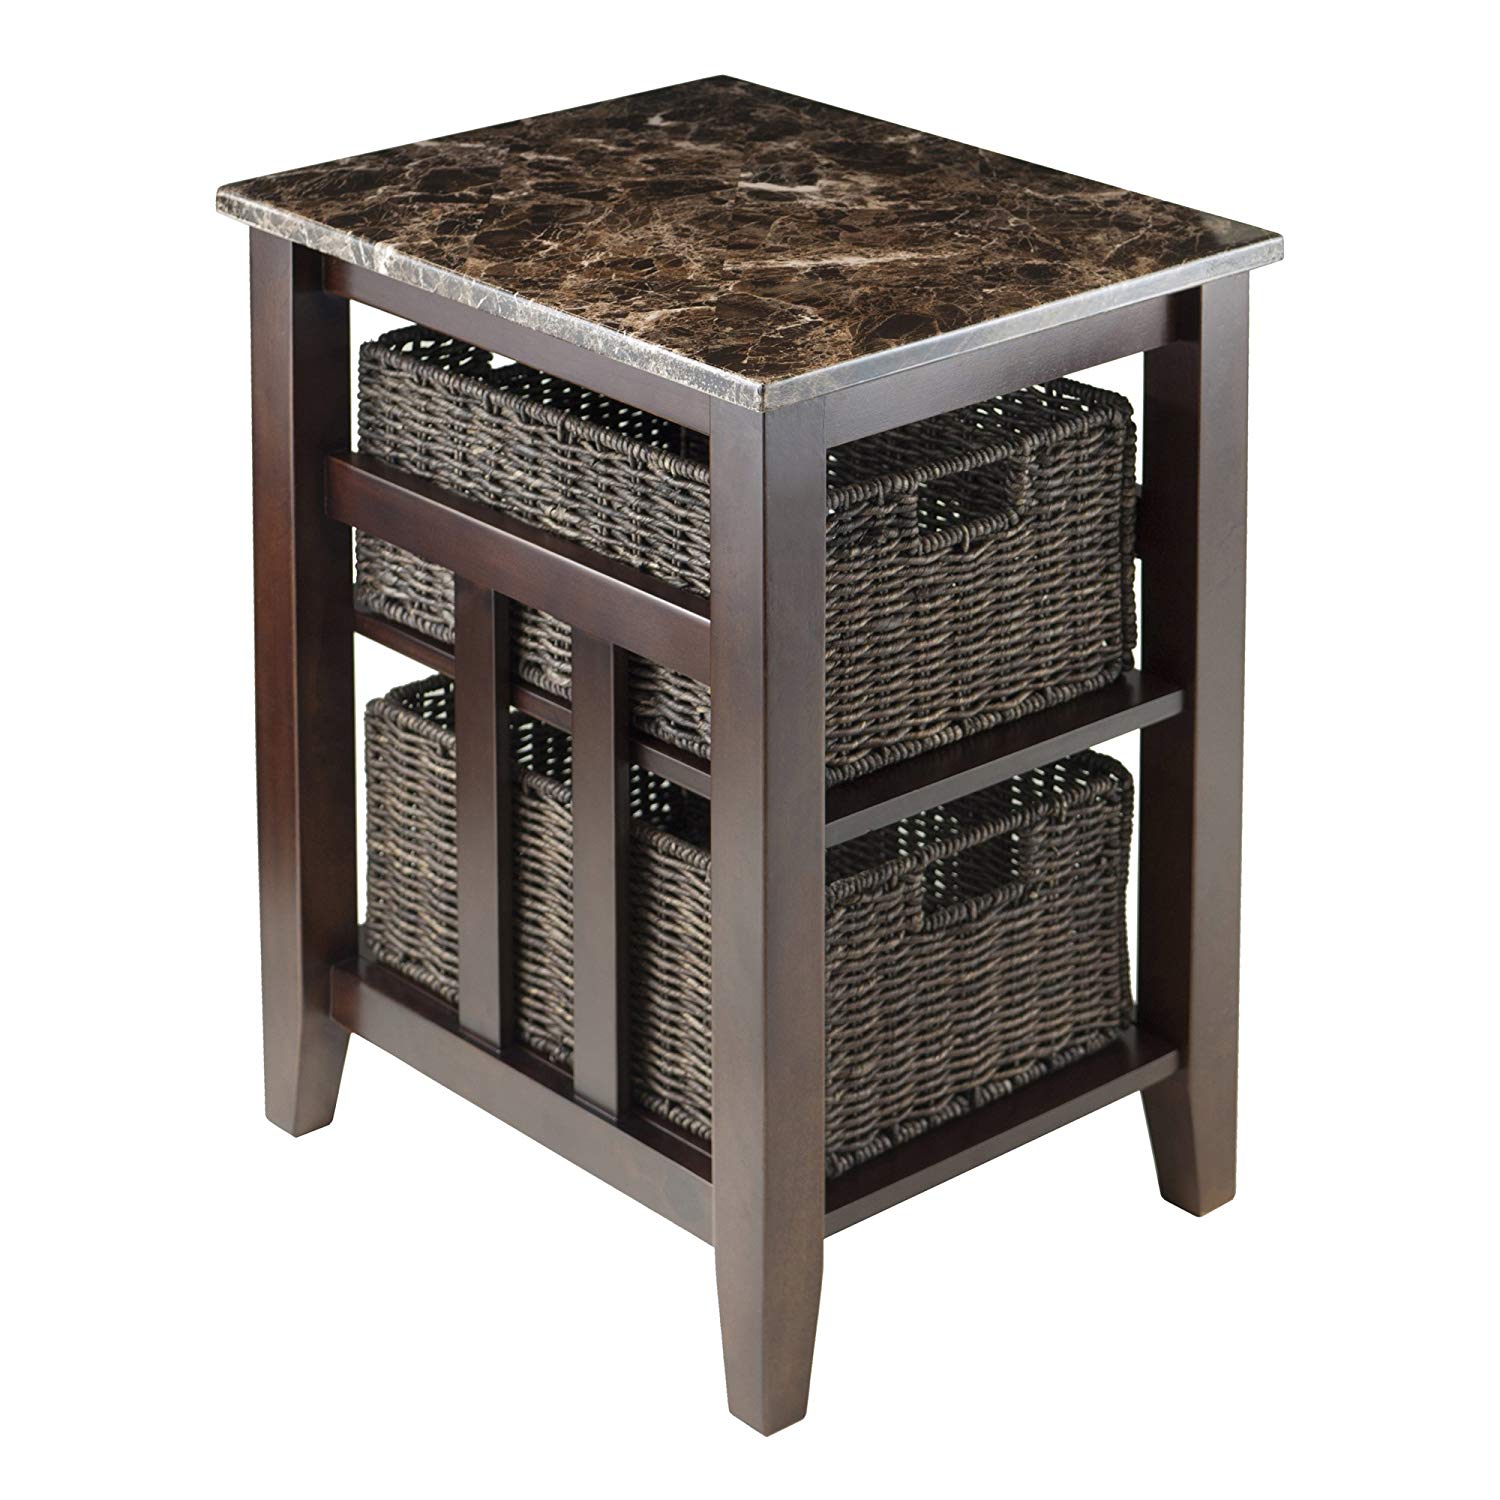 winsome wood faux marble top zoey side table with accent baskets kitchen dining old end tables outside patio set depot asian lamps bedroom chairs small furniture cream colored